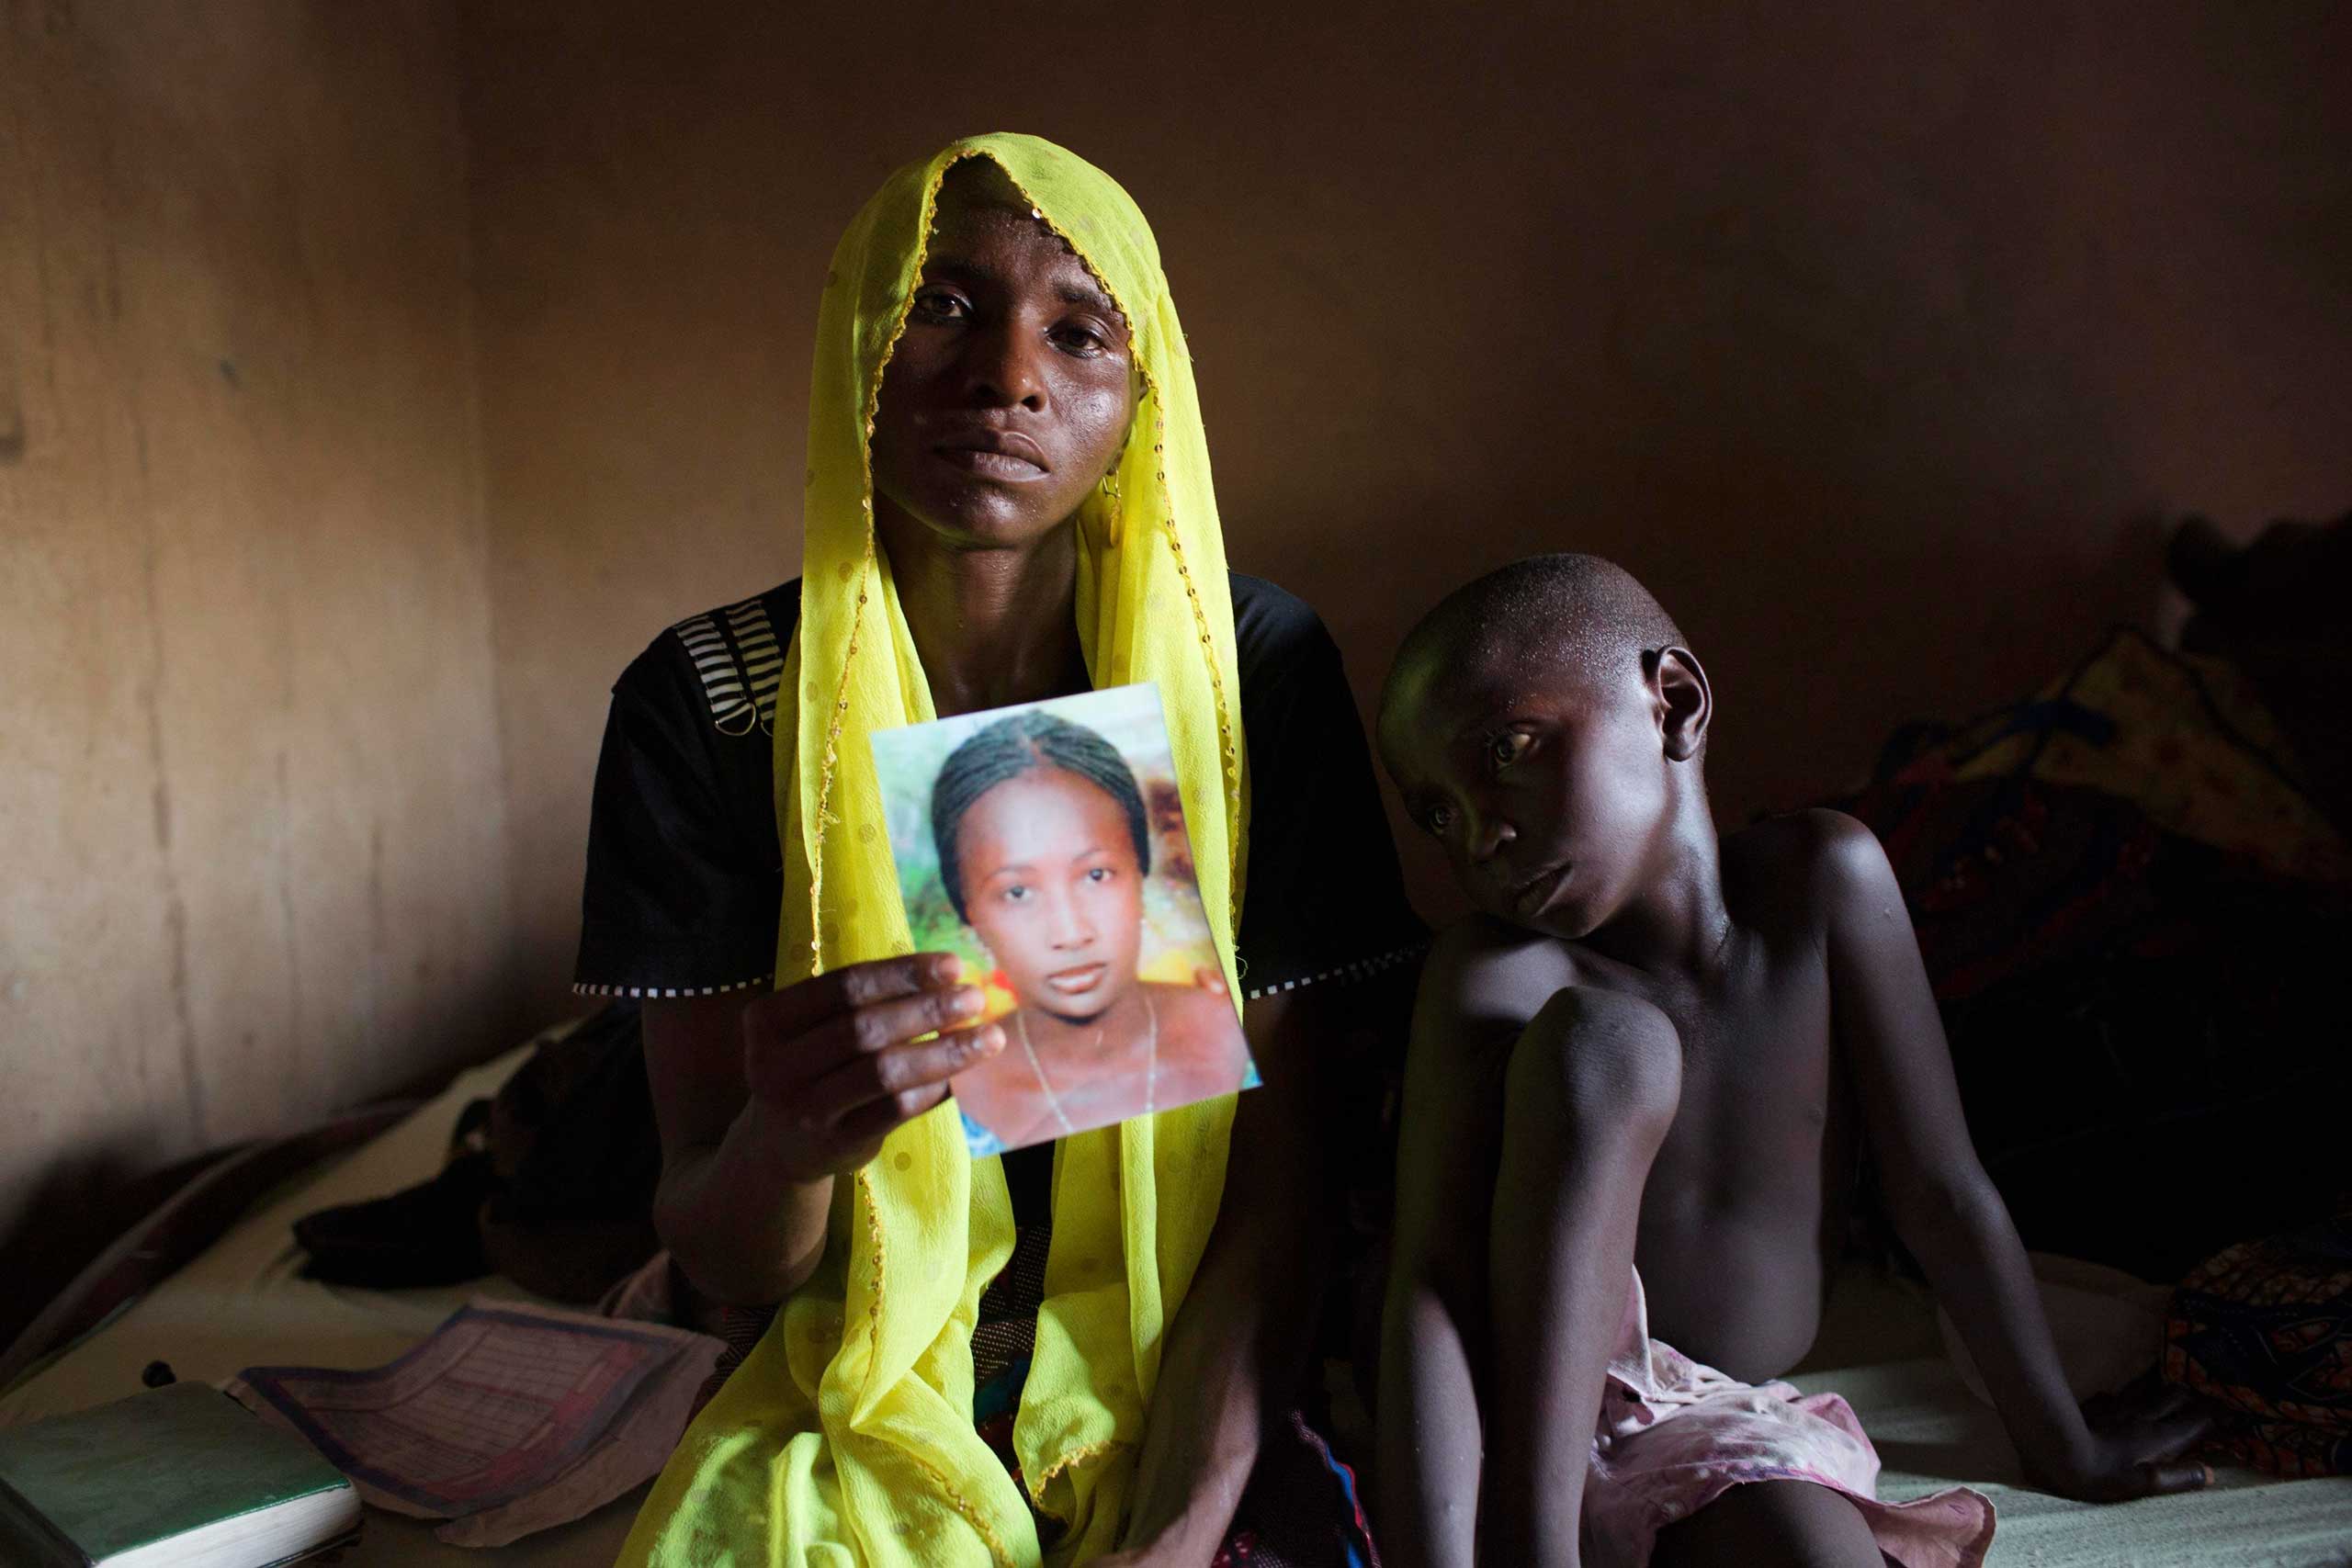 File photo shows Rachel Daniel holding  up a picture of her abducted daughter Rose Daniel as her son Bukar sits beside her at her home in Maiduguri